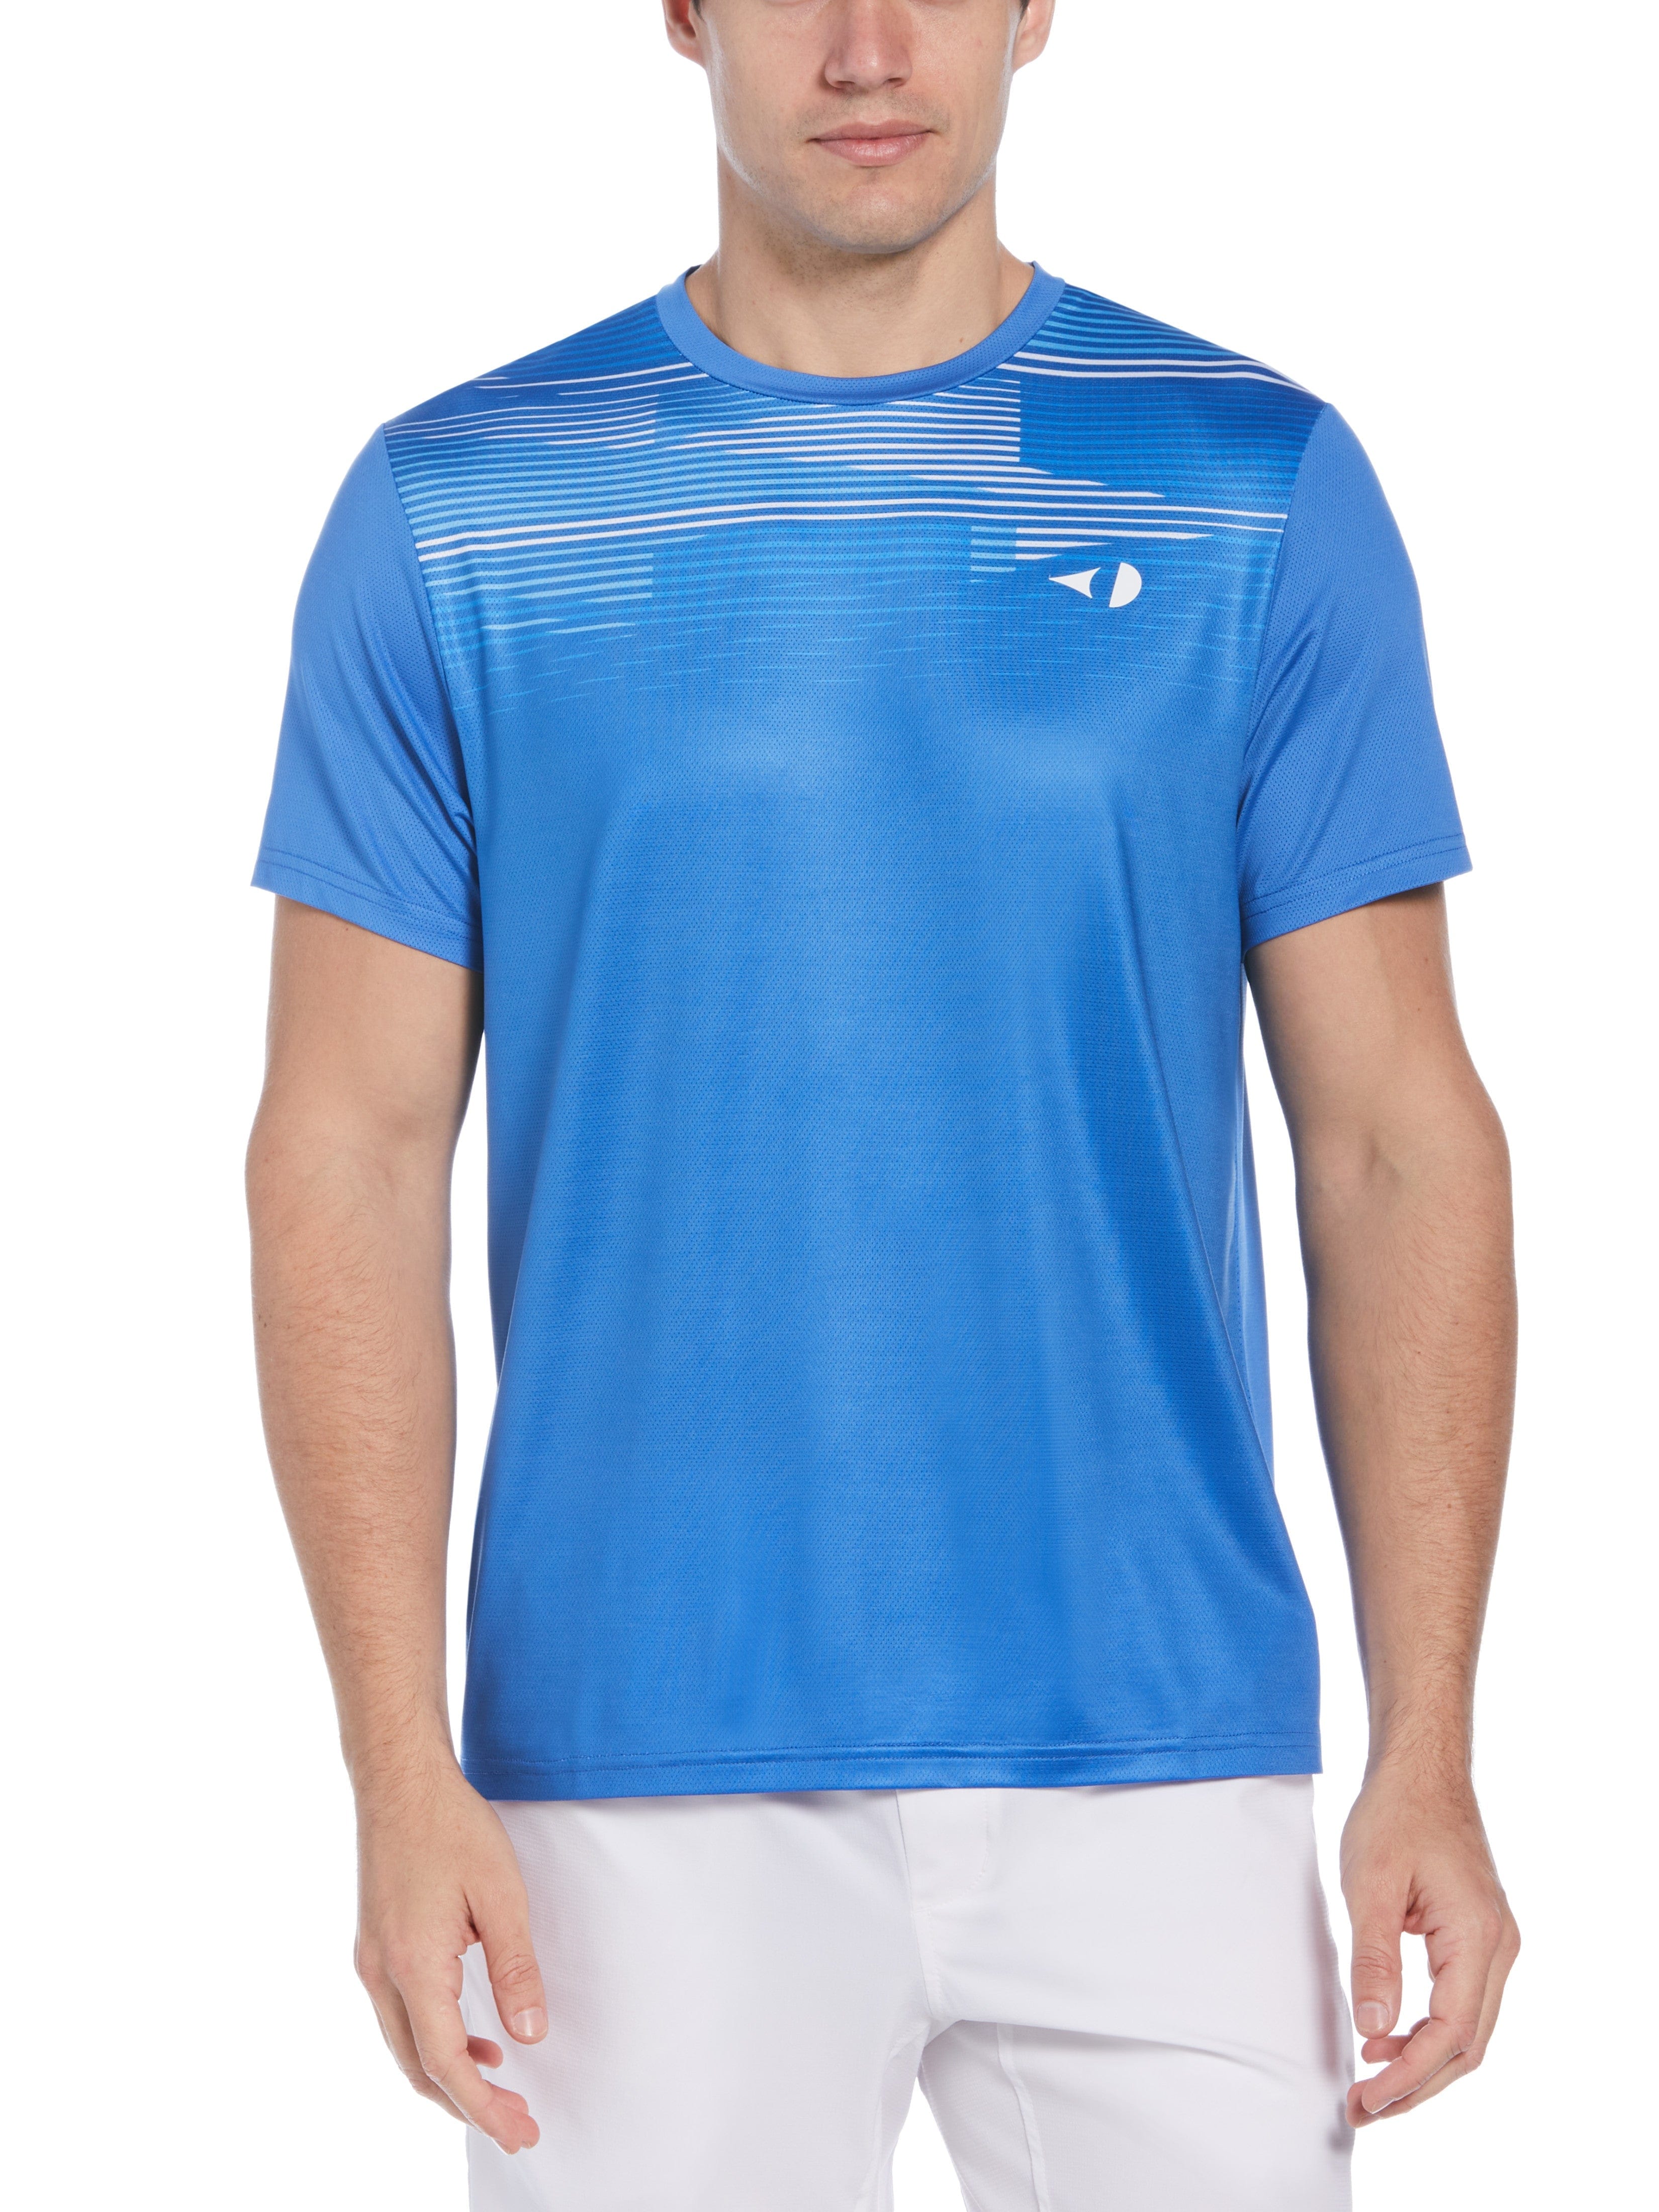 Grand Slam Mens Linear Chest Printed Tennis T-Shirt, Size Large, Egyptian Blue, Polyester/Spandex | Golf Apparel Shop